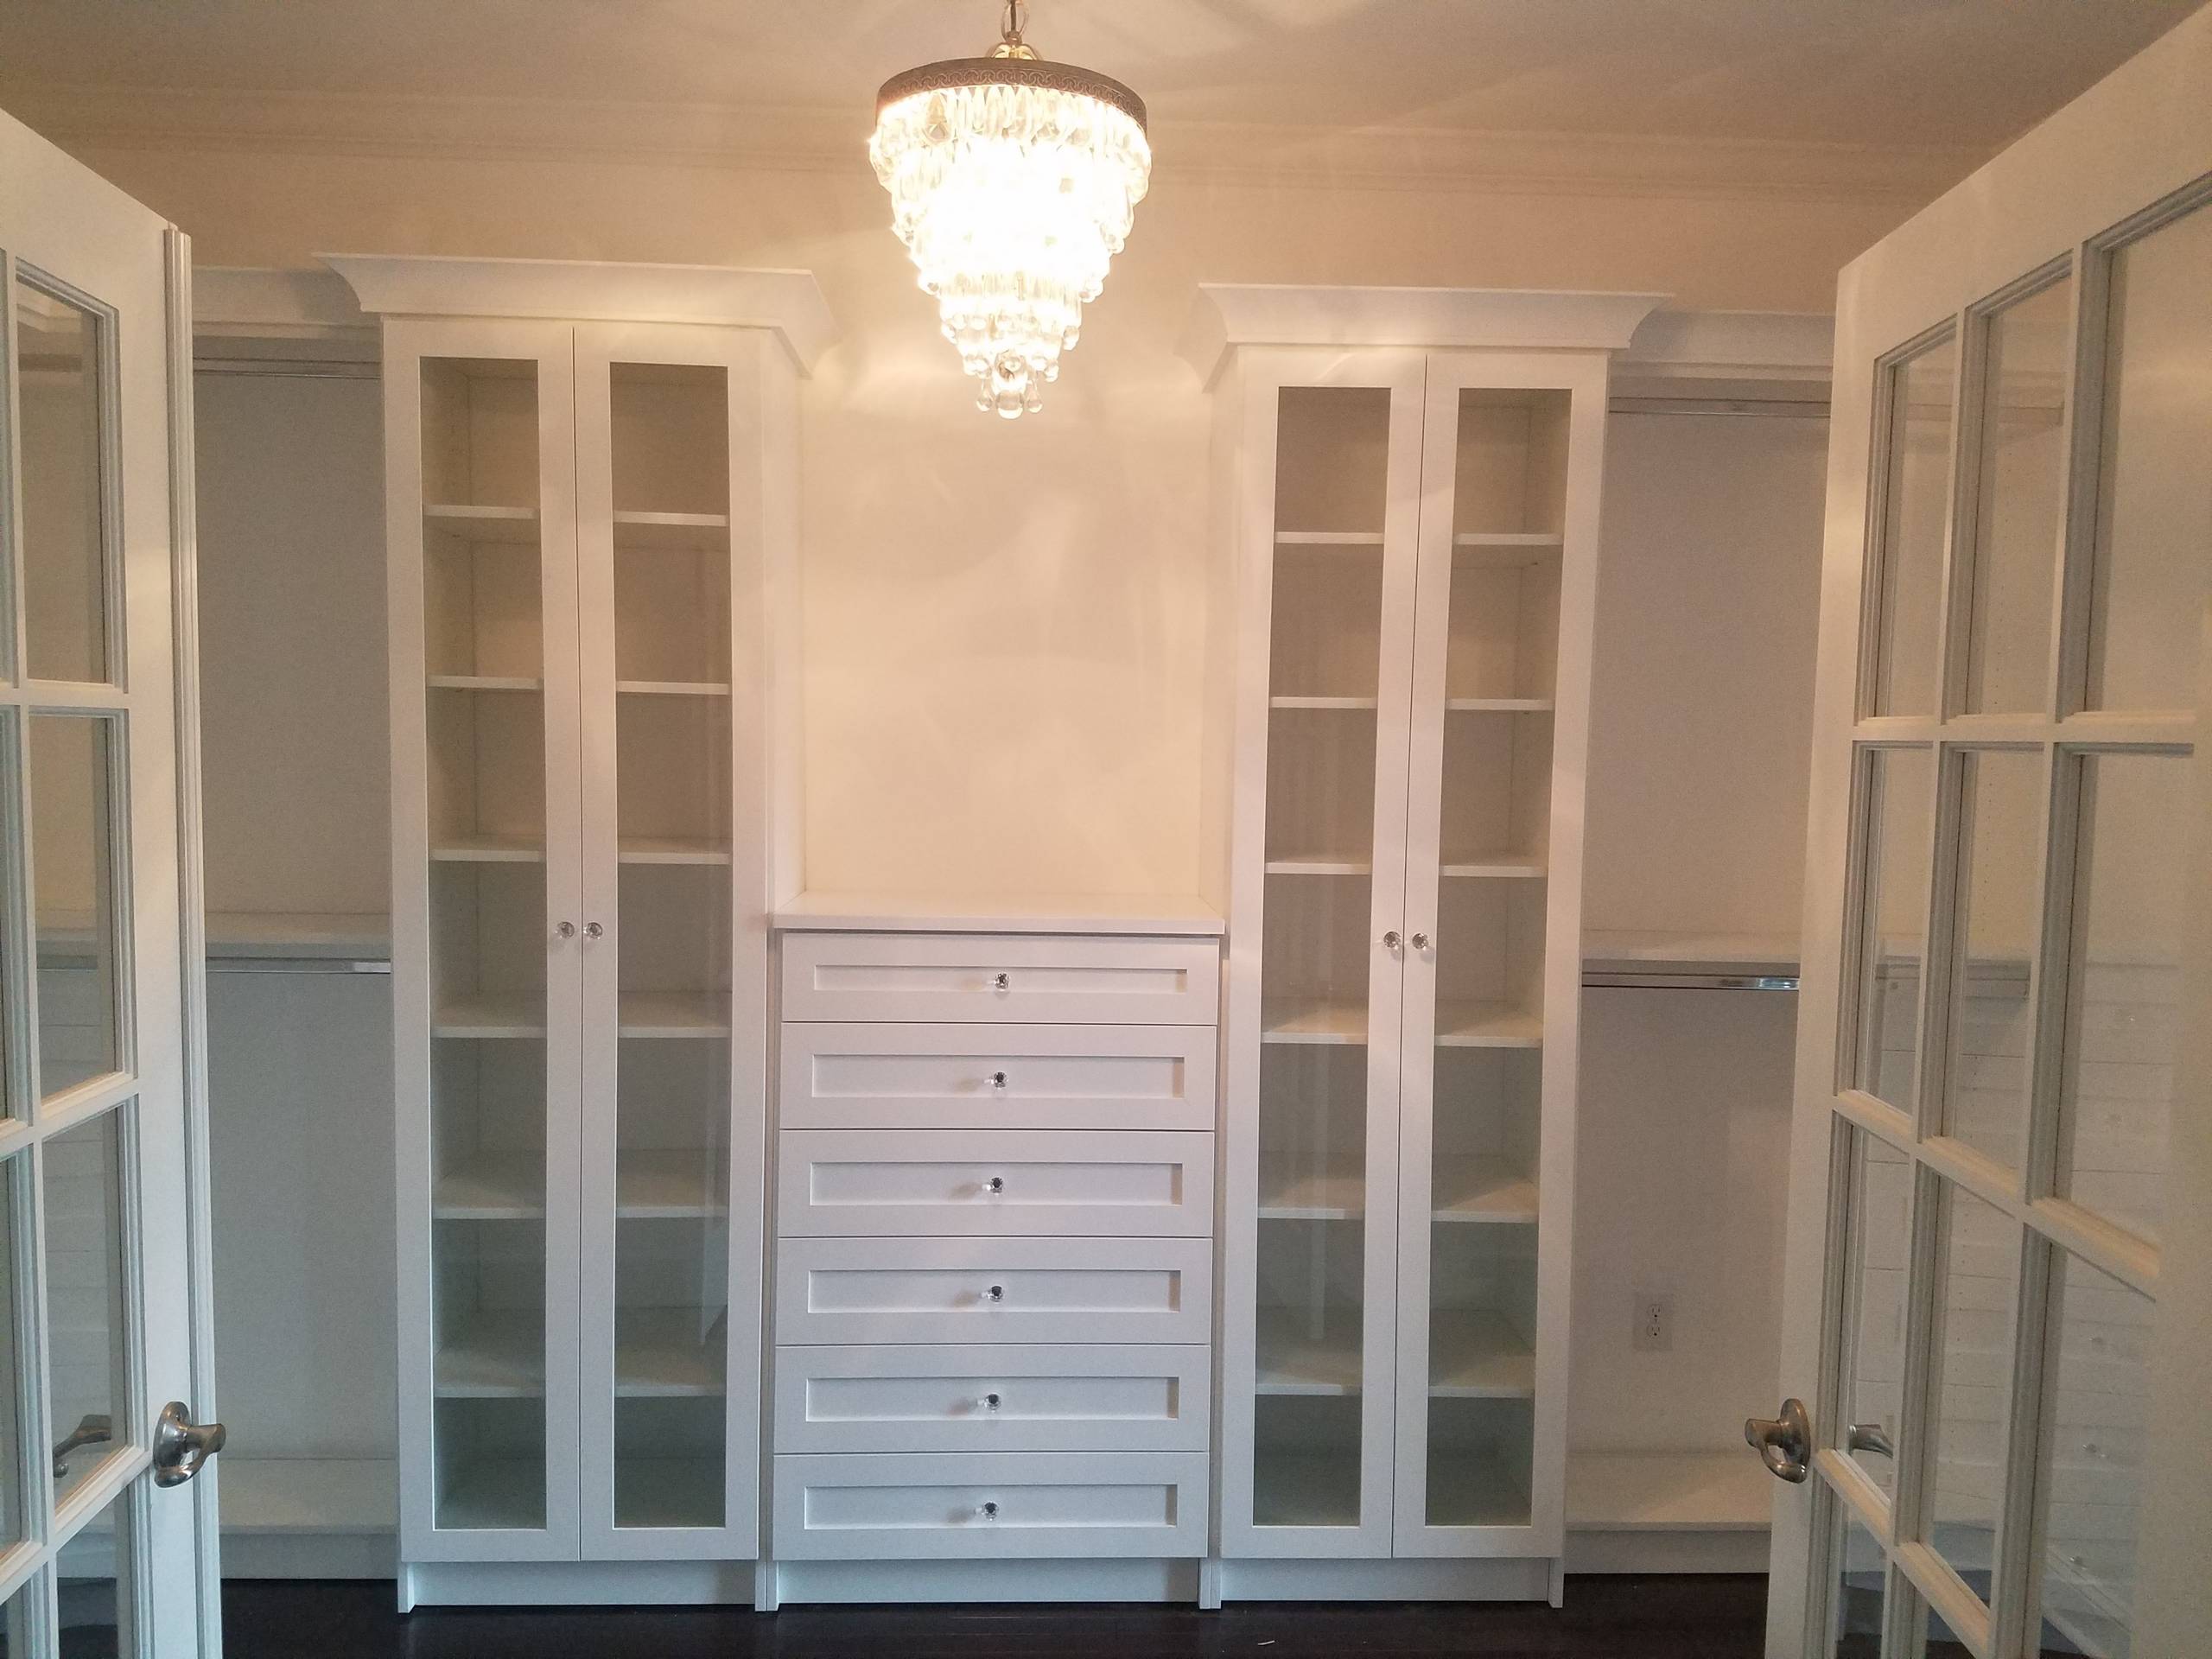 White walk in closet with shaker style drawer fronts and crown molding.  Also includes glass cabinets